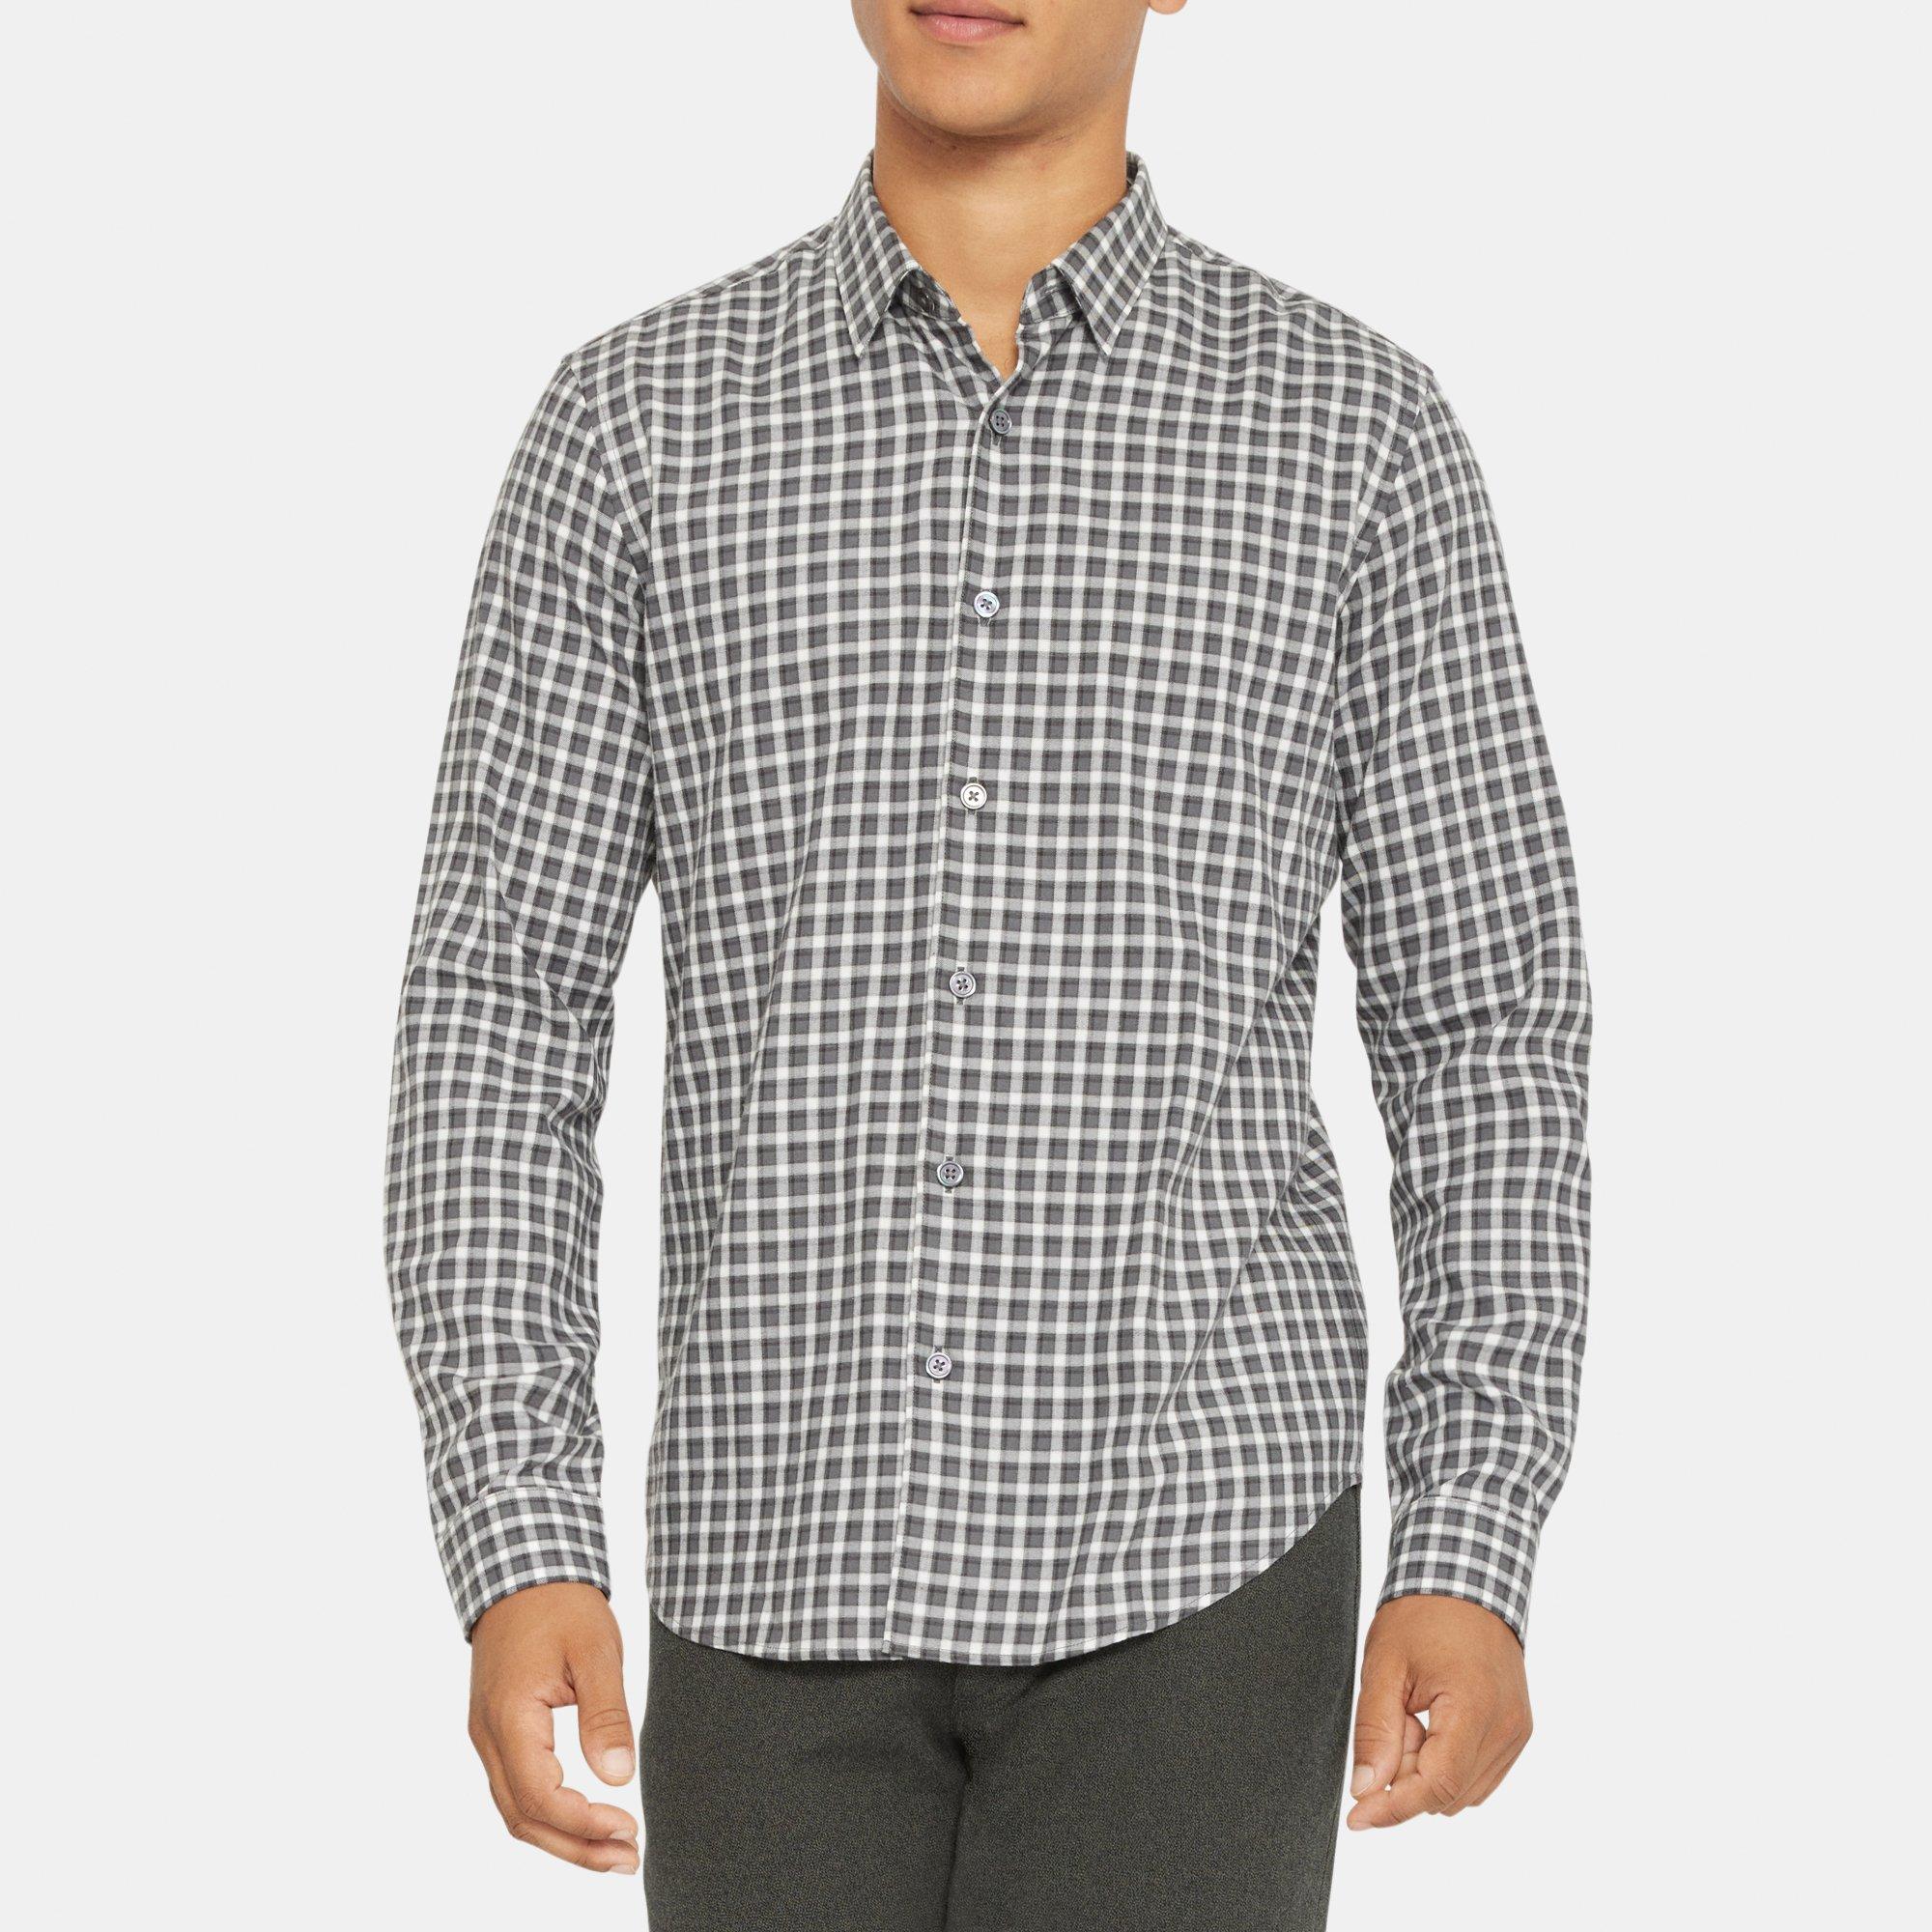 Theory Long-Sleeve Shirt in Gingham Cotton